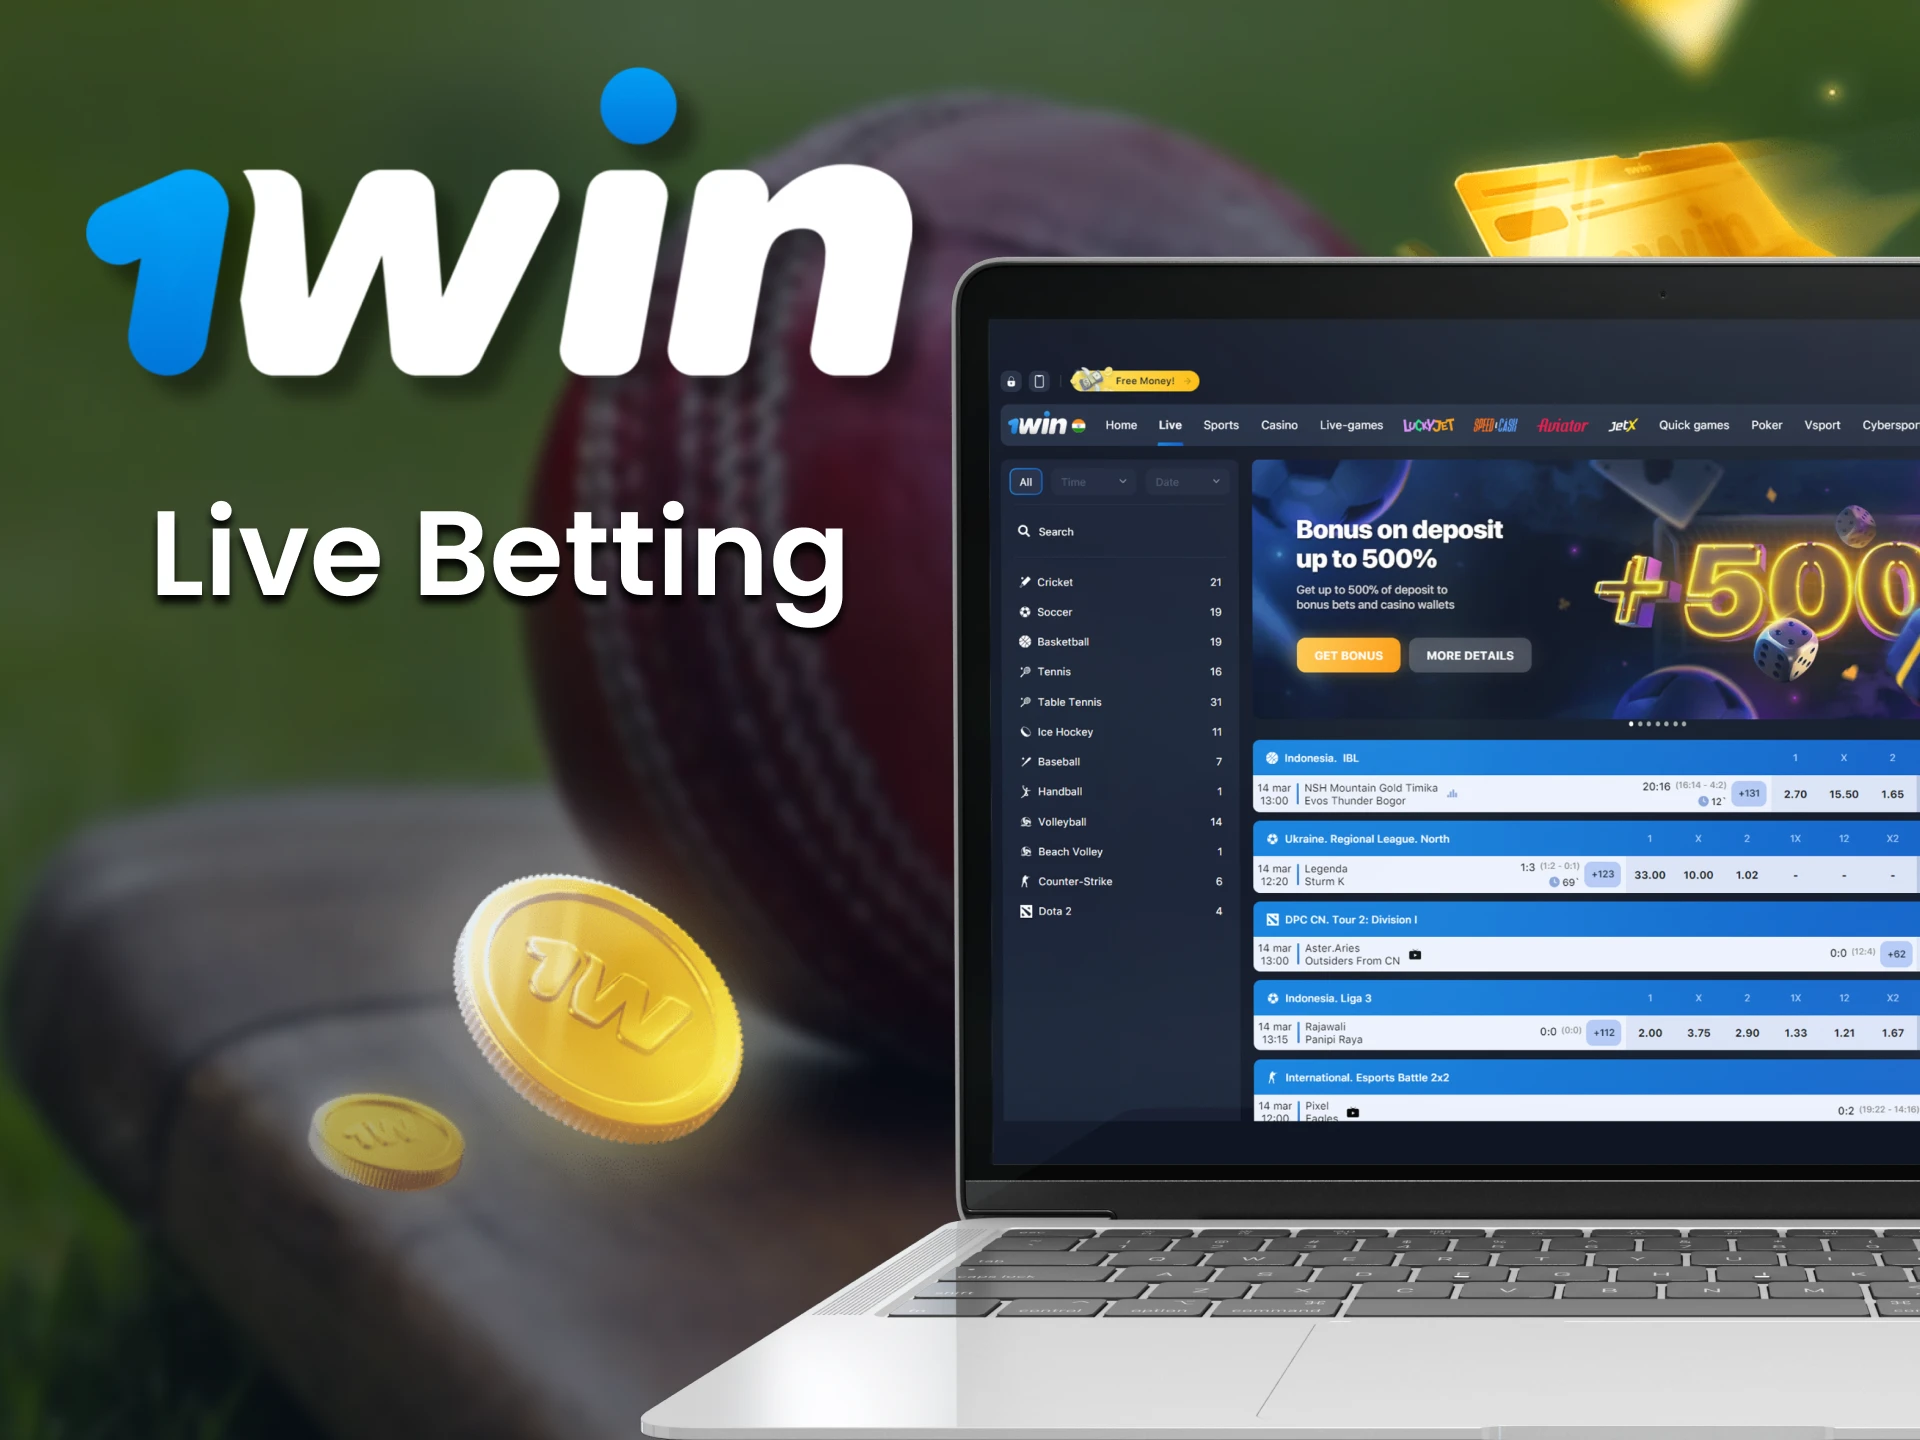 Place live bets on today's sports and esports events with 1win.